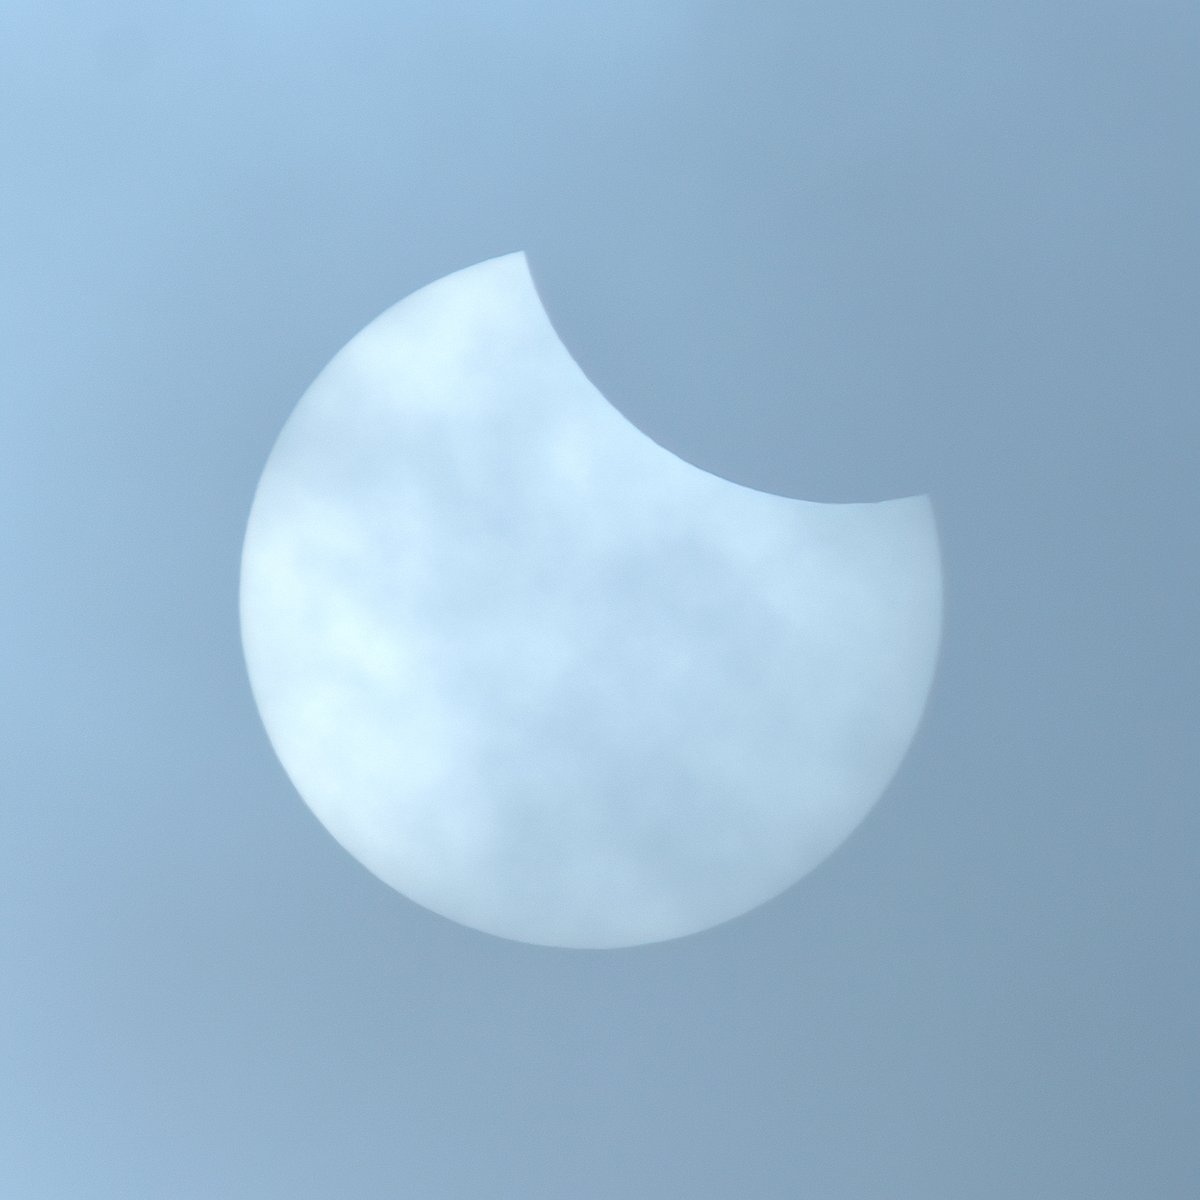 Solar eclipse now visible through heavy cloud here in Argyll, Scotland. Max (30% here) at 11.15am. Please be careful watching the sun solar filter required although the clouds were acting like a solar filter for me here in this image. #solareclipse #solareclipse2021 #scotland